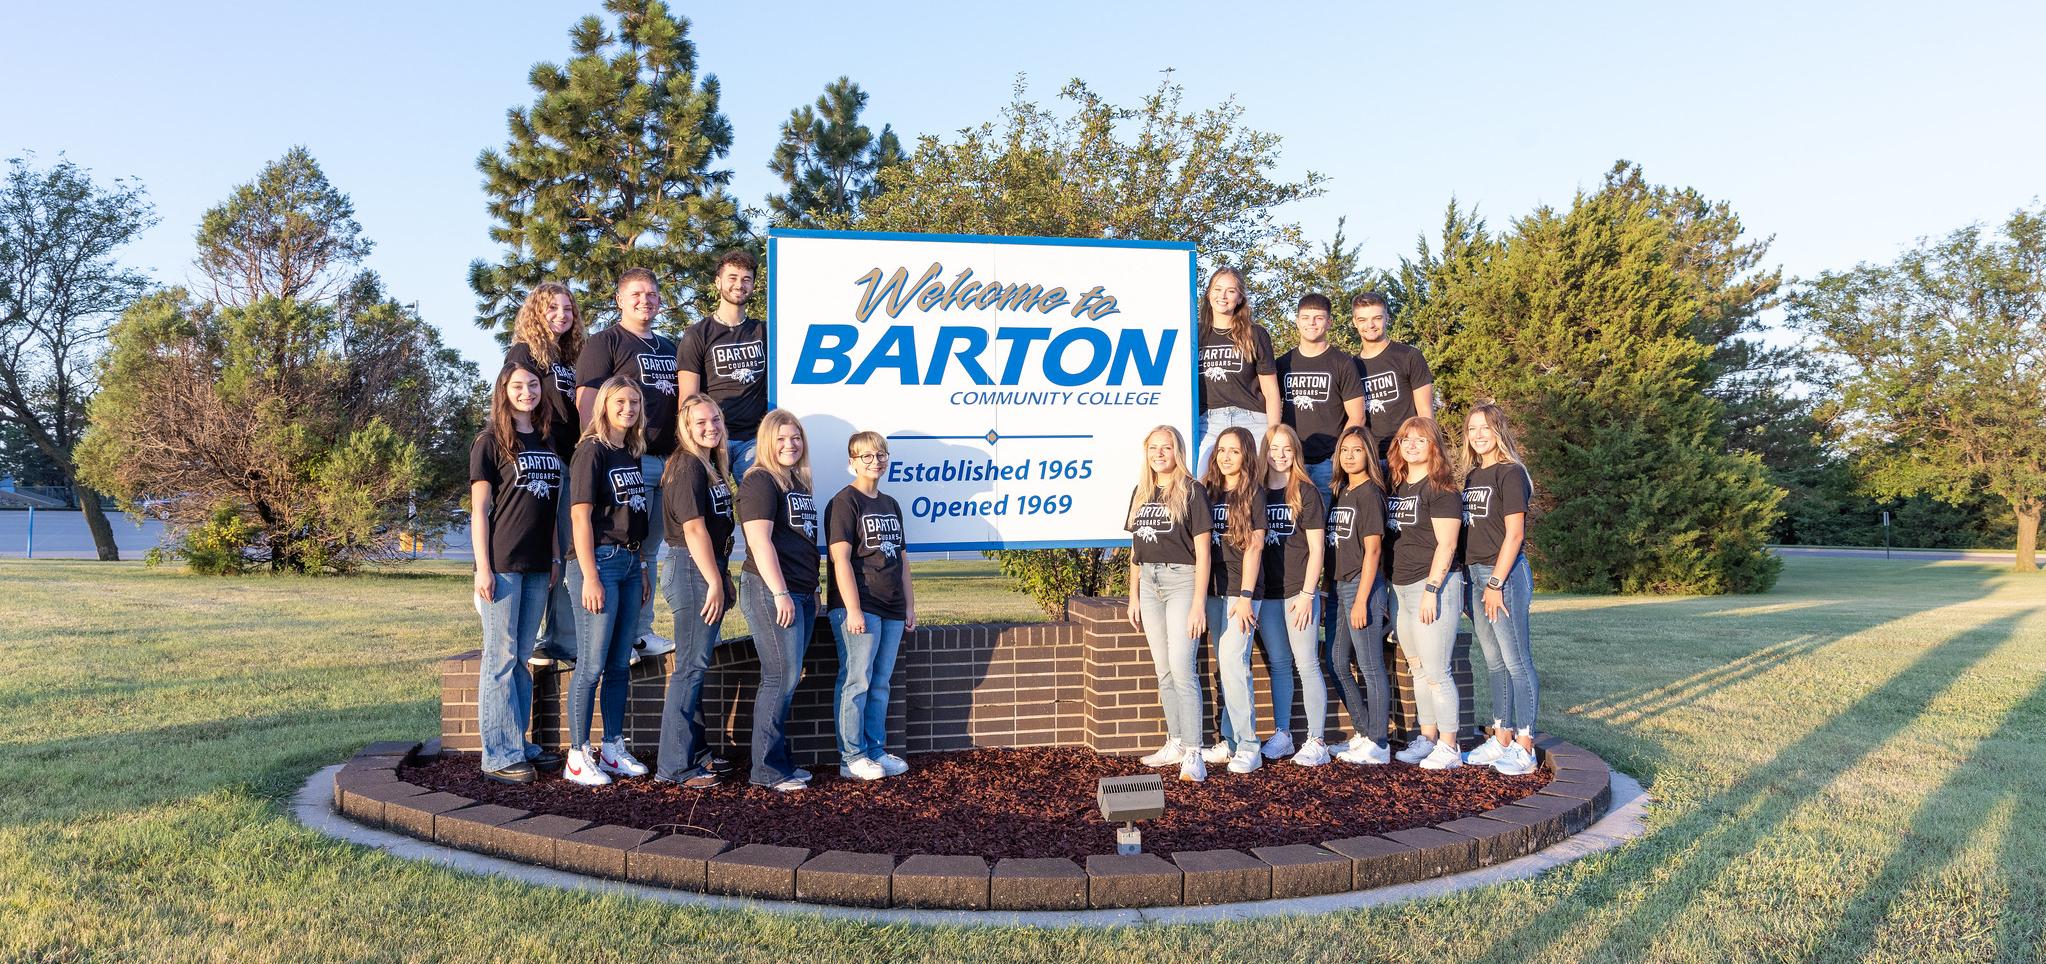 Student Ambassadors by the Barton Welcome Sign